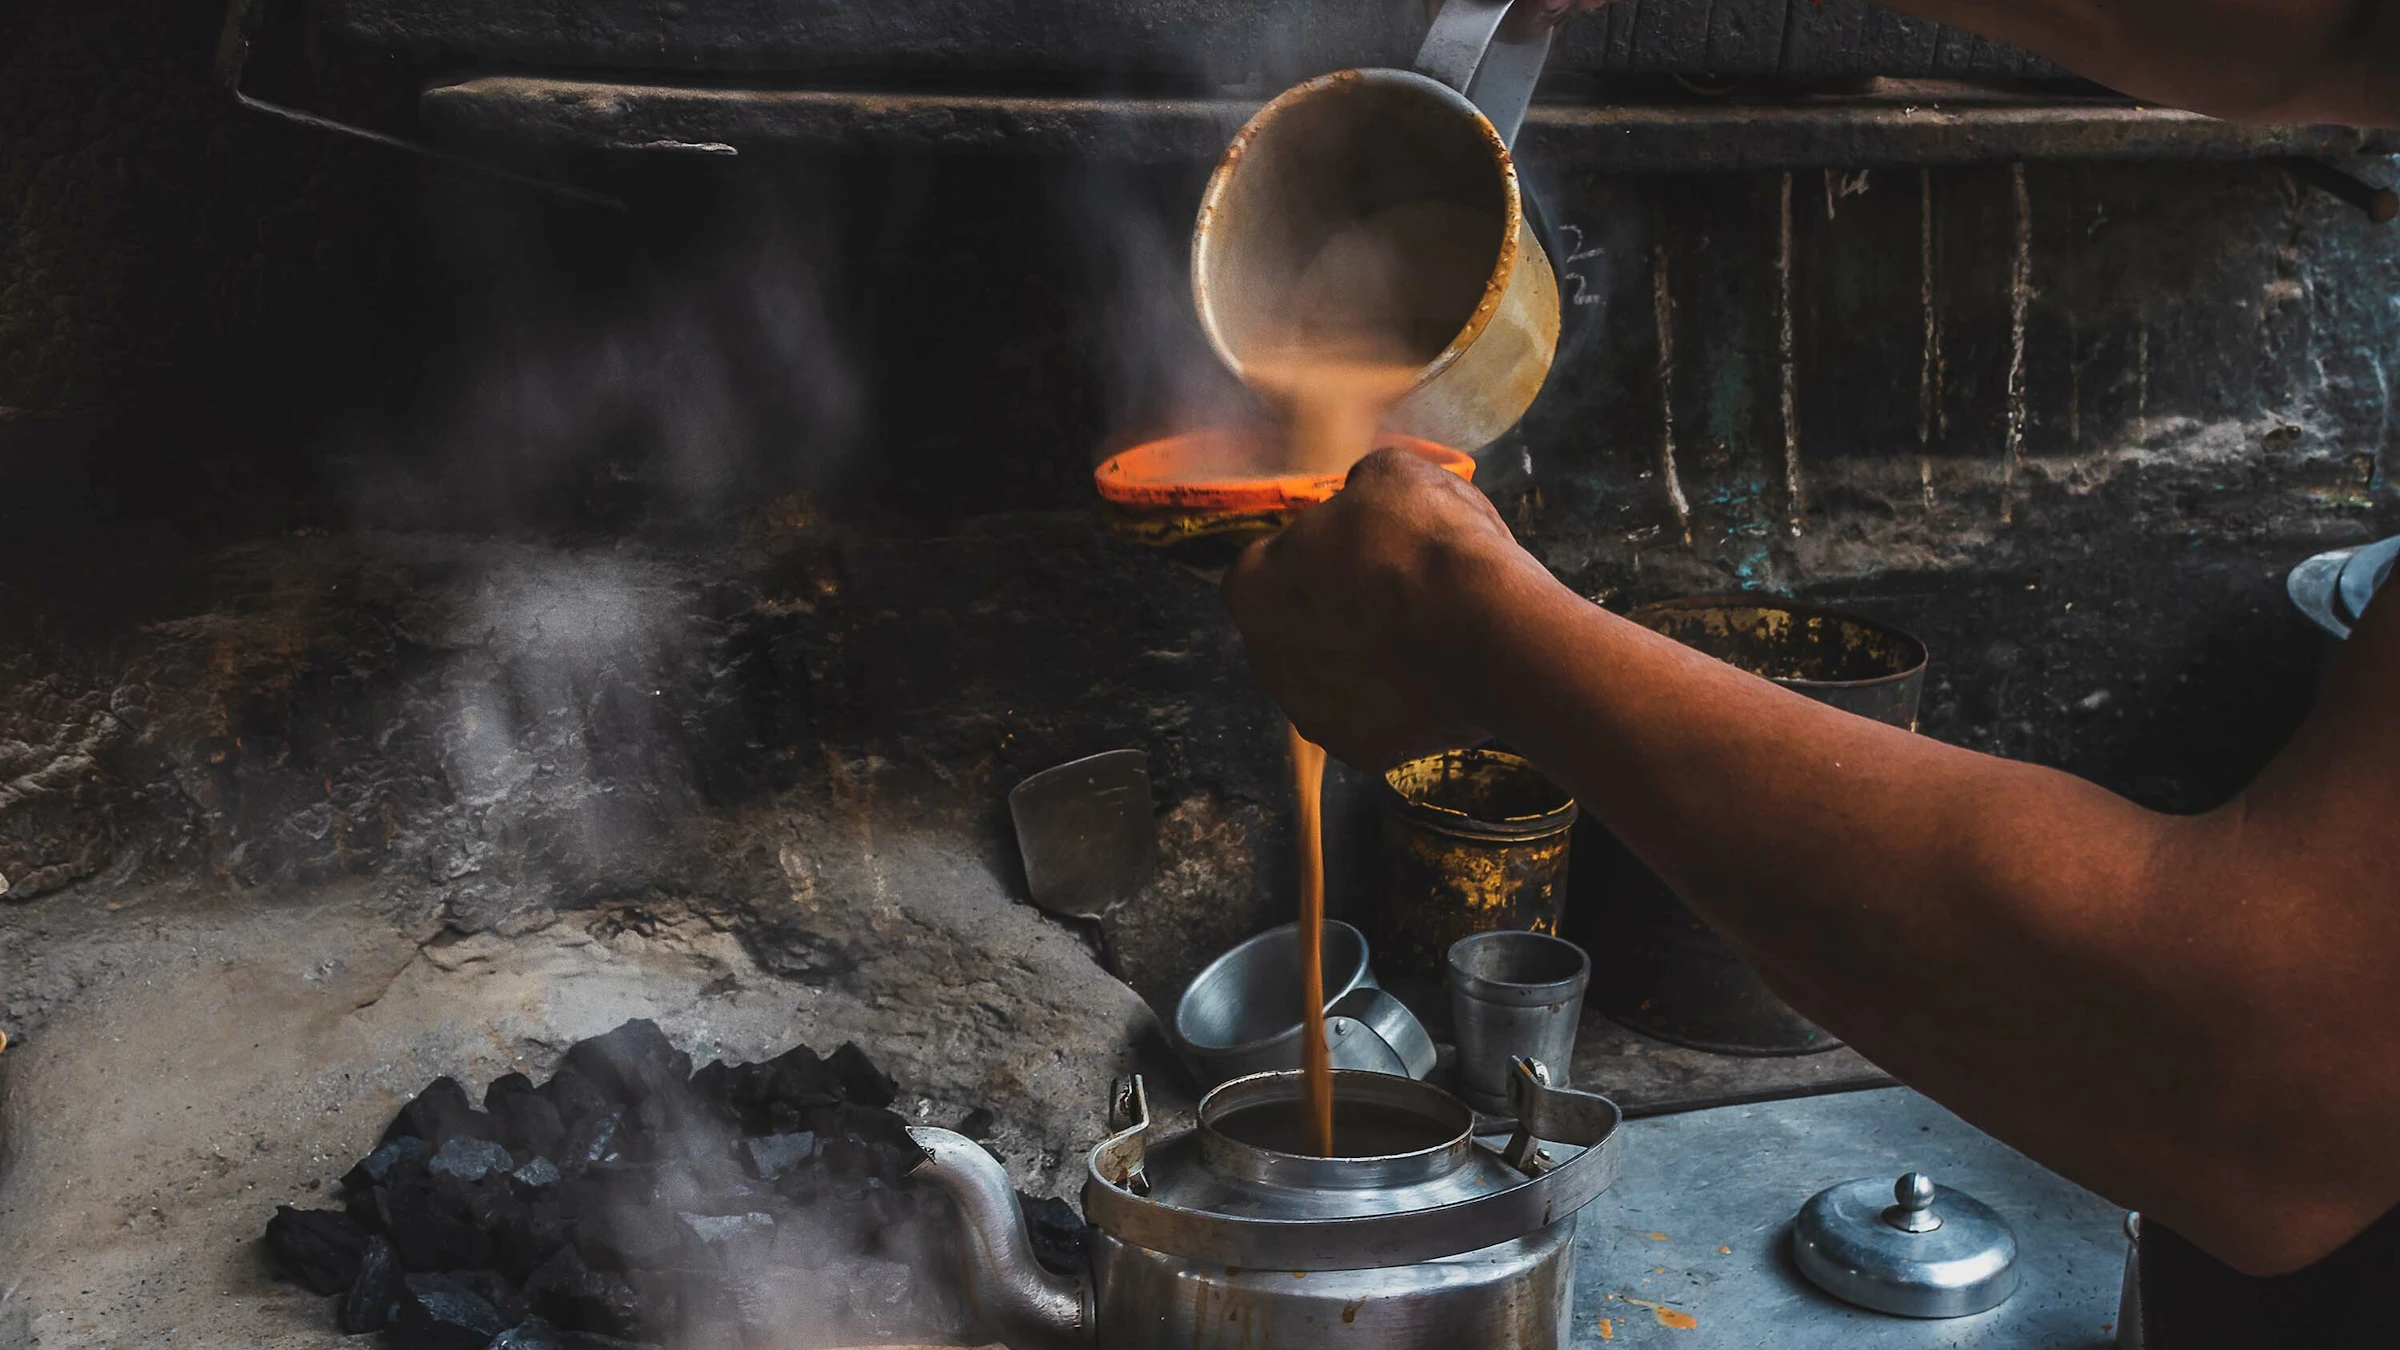 Hot chai being poured through an orange strainer into a metal canteen.